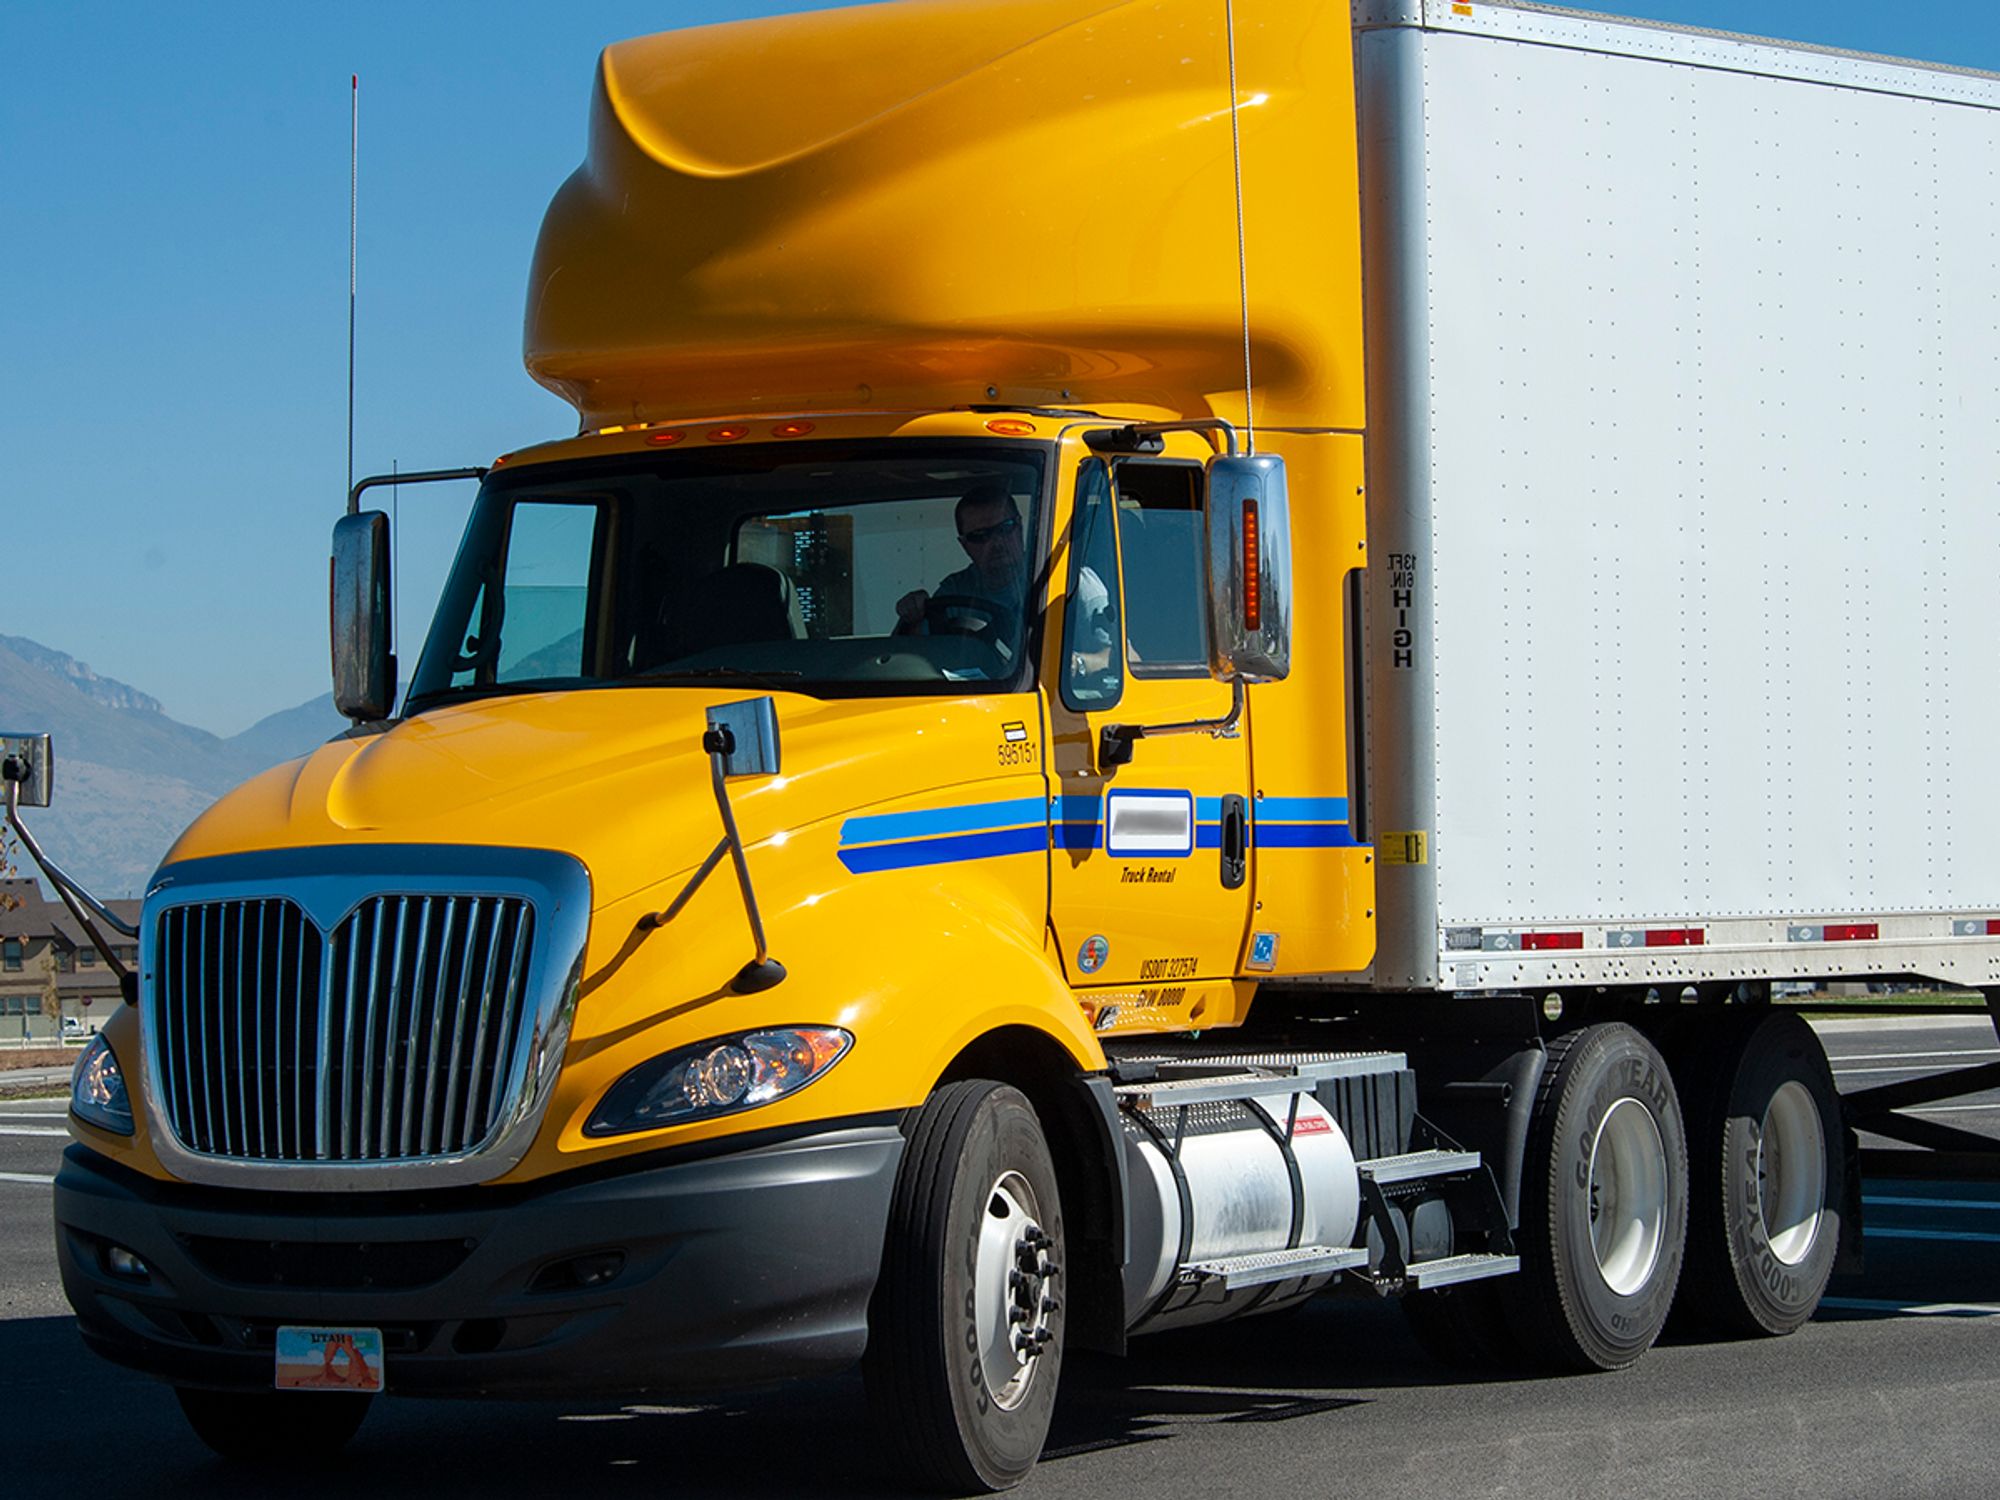 How should rental vehicles, leased driver’s vehicles, and intermodal equipment be marked?